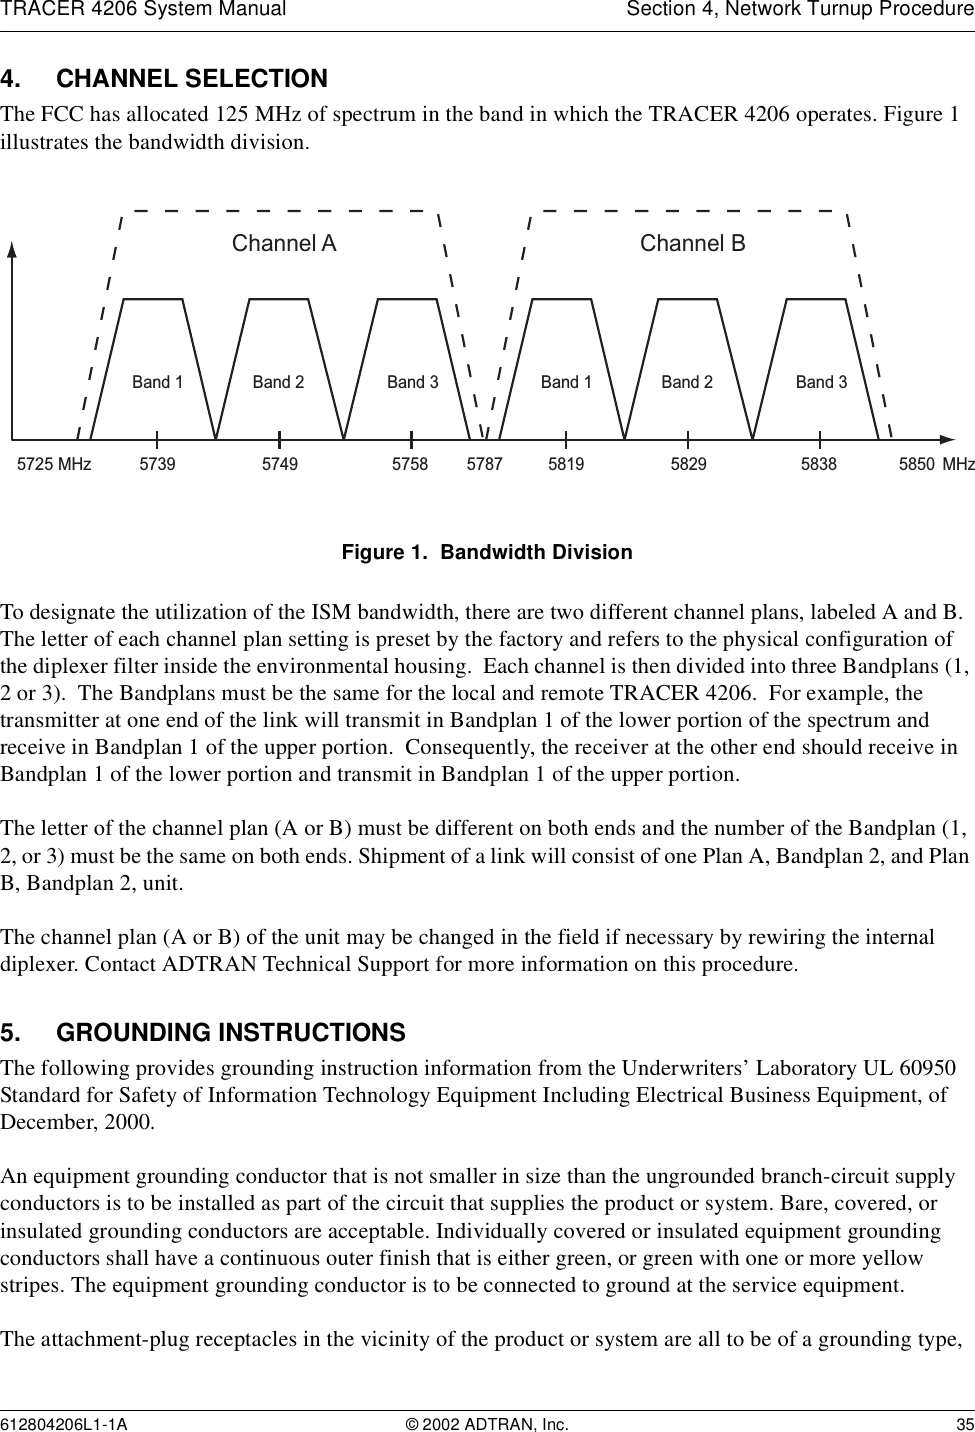 TRACER 4206 System Manual Section 4, Network Turnup Procedure612804206L1-1A © 2002 ADTRAN, Inc. 354. CHANNEL SELECTIONThe FCC has allocated 125 MHz of spectrum in the band in which the TRACER 4206 operates. Figure 1 illustrates the bandwidth division. Figure 1.  Bandwidth DivisionTo designate the utilization of the ISM bandwidth, there are two different channel plans, labeled A and B.  The letter of each channel plan setting is preset by the factory and refers to the physical configuration of the diplexer filter inside the environmental housing.  Each channel is then divided into three Bandplans (1, 2 or 3).  The Bandplans must be the same for the local and remote TRACER 4206.  For example, the transmitter at one end of the link will transmit in Bandplan 1 of the lower portion of the spectrum and receive in Bandplan 1 of the upper portion.  Consequently, the receiver at the other end should receive in Bandplan 1 of the lower portion and transmit in Bandplan 1 of the upper portion.The letter of the channel plan (A or B) must be different on both ends and the number of the Bandplan (1, 2, or 3) must be the same on both ends. Shipment of a link will consist of one Plan A, Bandplan 2, and Plan B, Bandplan 2, unit.The channel plan (A or B) of the unit may be changed in the field if necessary by rewiring the internal diplexer. Contact ADTRAN Technical Support for more information on this procedure.5. GROUNDING INSTRUCTIONSThe following provides grounding instruction information from the Underwriters’ Laboratory UL 60950 Standard for Safety of Information Technology Equipment Including Electrical Business Equipment, of December, 2000.An equipment grounding conductor that is not smaller in size than the ungrounded branch-circuit supply conductors is to be installed as part of the circuit that supplies the product or system. Bare, covered, or insulated grounding conductors are acceptable. Individually covered or insulated equipment grounding conductors shall have a continuous outer finish that is either green, or green with one or more yellow stripes. The equipment grounding conductor is to be connected to ground at the service equipment.The attachment-plug receptacles in the vicinity of the product or system are all to be of a grounding type, Channel A57395725 5787 58505749 5758MHz MHzBand 3Band 2Band 1Channel B5819 5829 5838Band 3Band 2Band 1